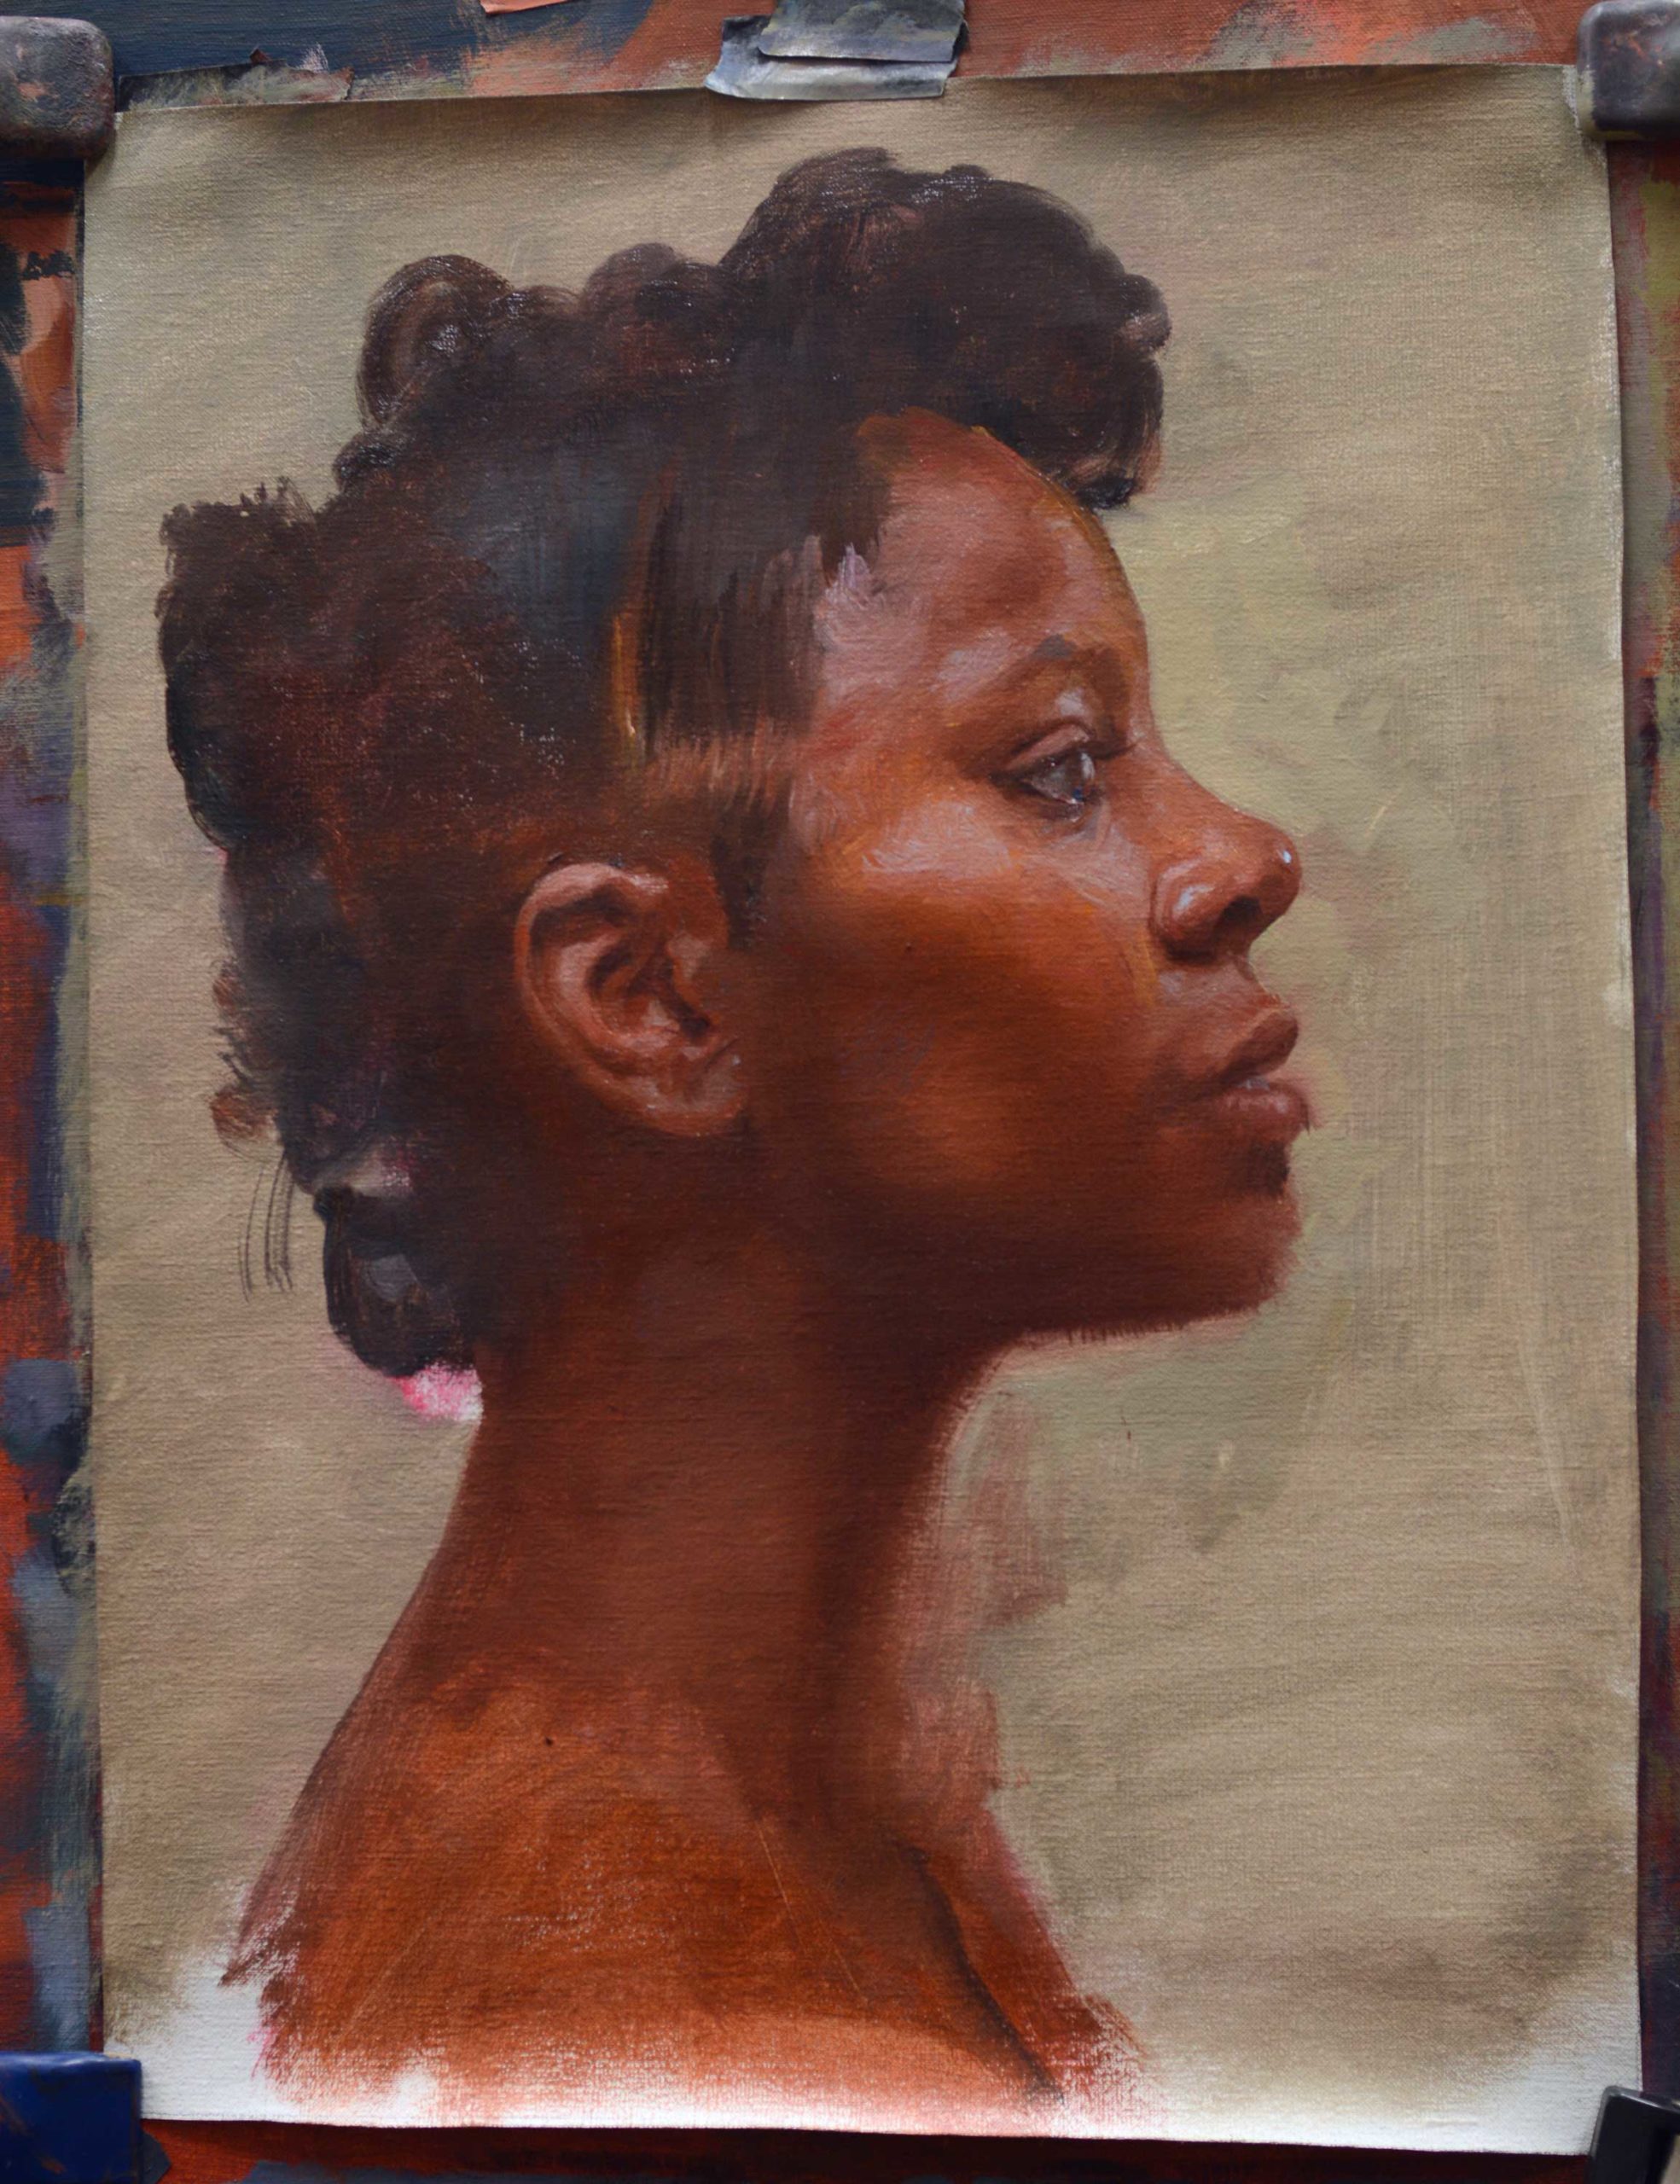 Continue refining and building a likeness in an oil painted portrait of a head in profile